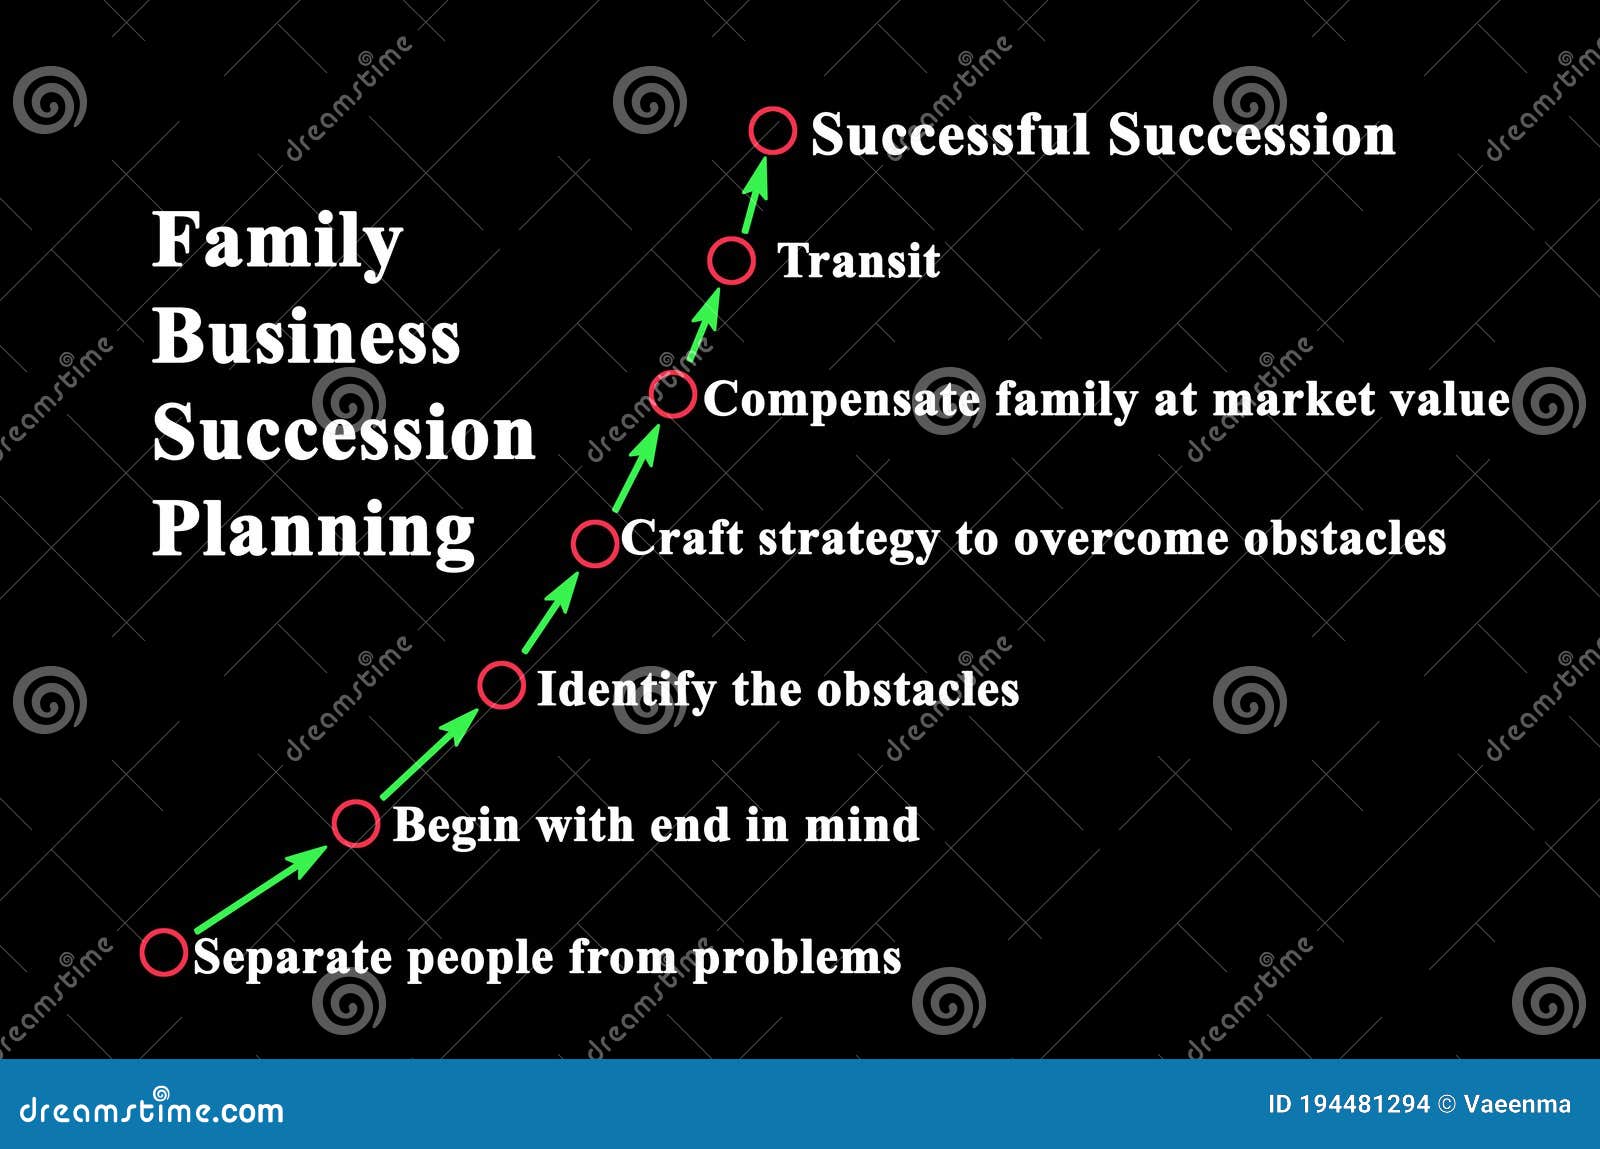 7 stages of succession planning in family business